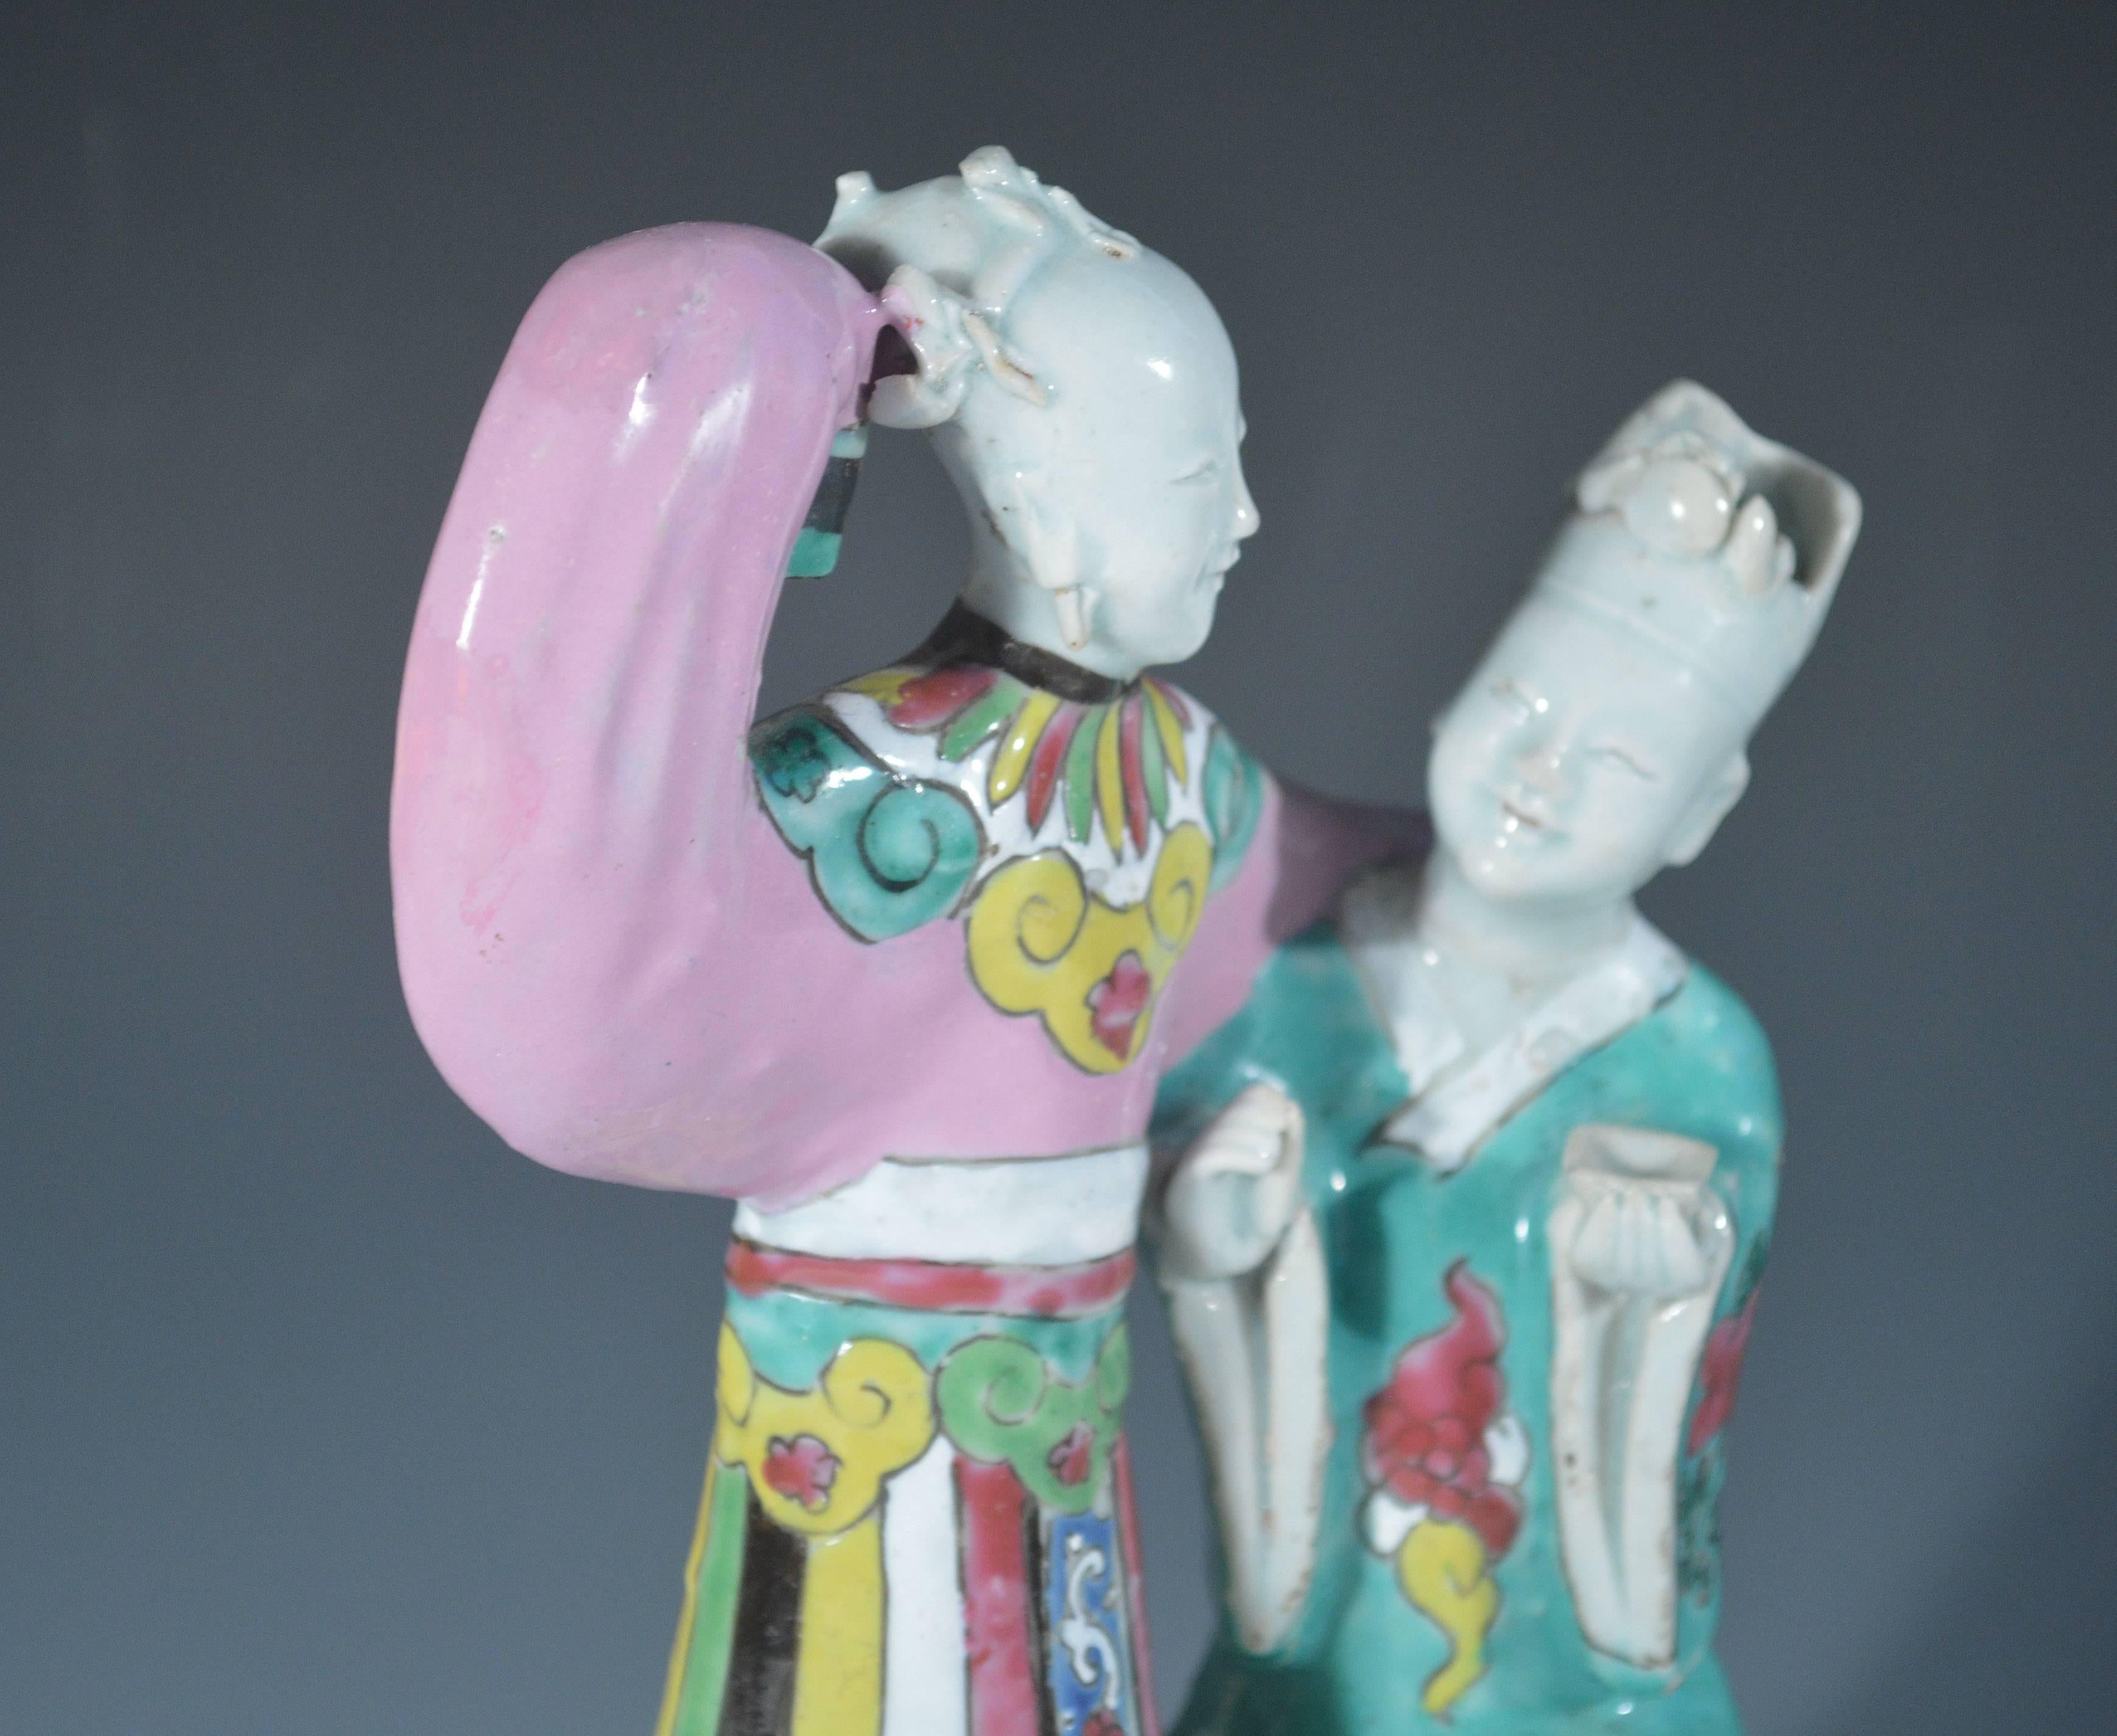 Chinese export porcelain figure group of two ladies,
late 18th century.

The unusual model depicts two figures. One, a lady in a multicolored striped garment, her right arm raised and another figure appearing to curtsey and holding a wine cup in